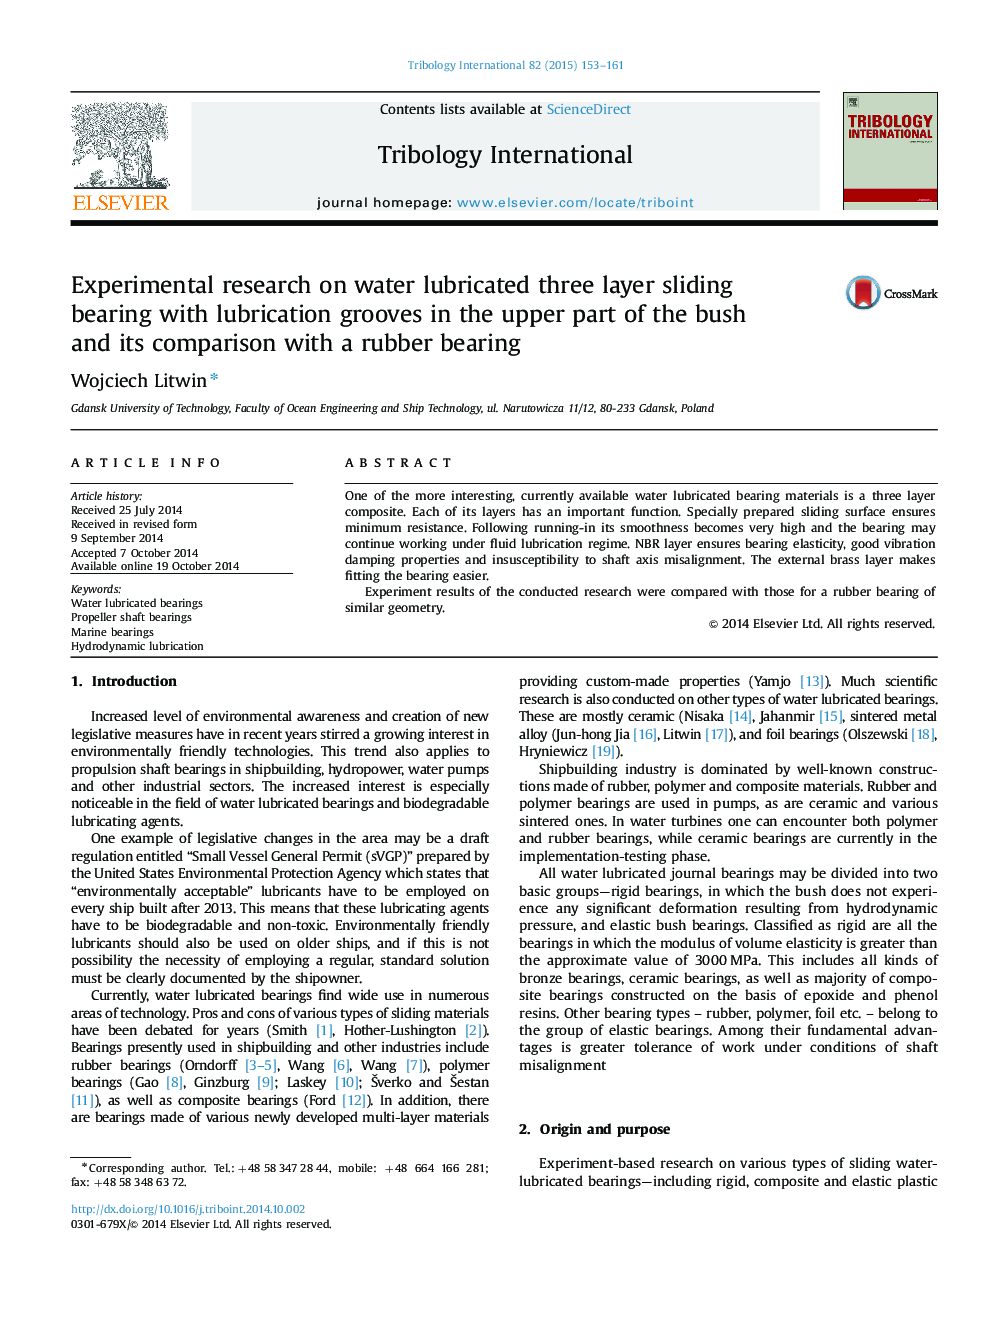 Experimental research on water lubricated three layer sliding bearing with lubrication grooves in the upper part of the bush and its comparison with a rubber bearing